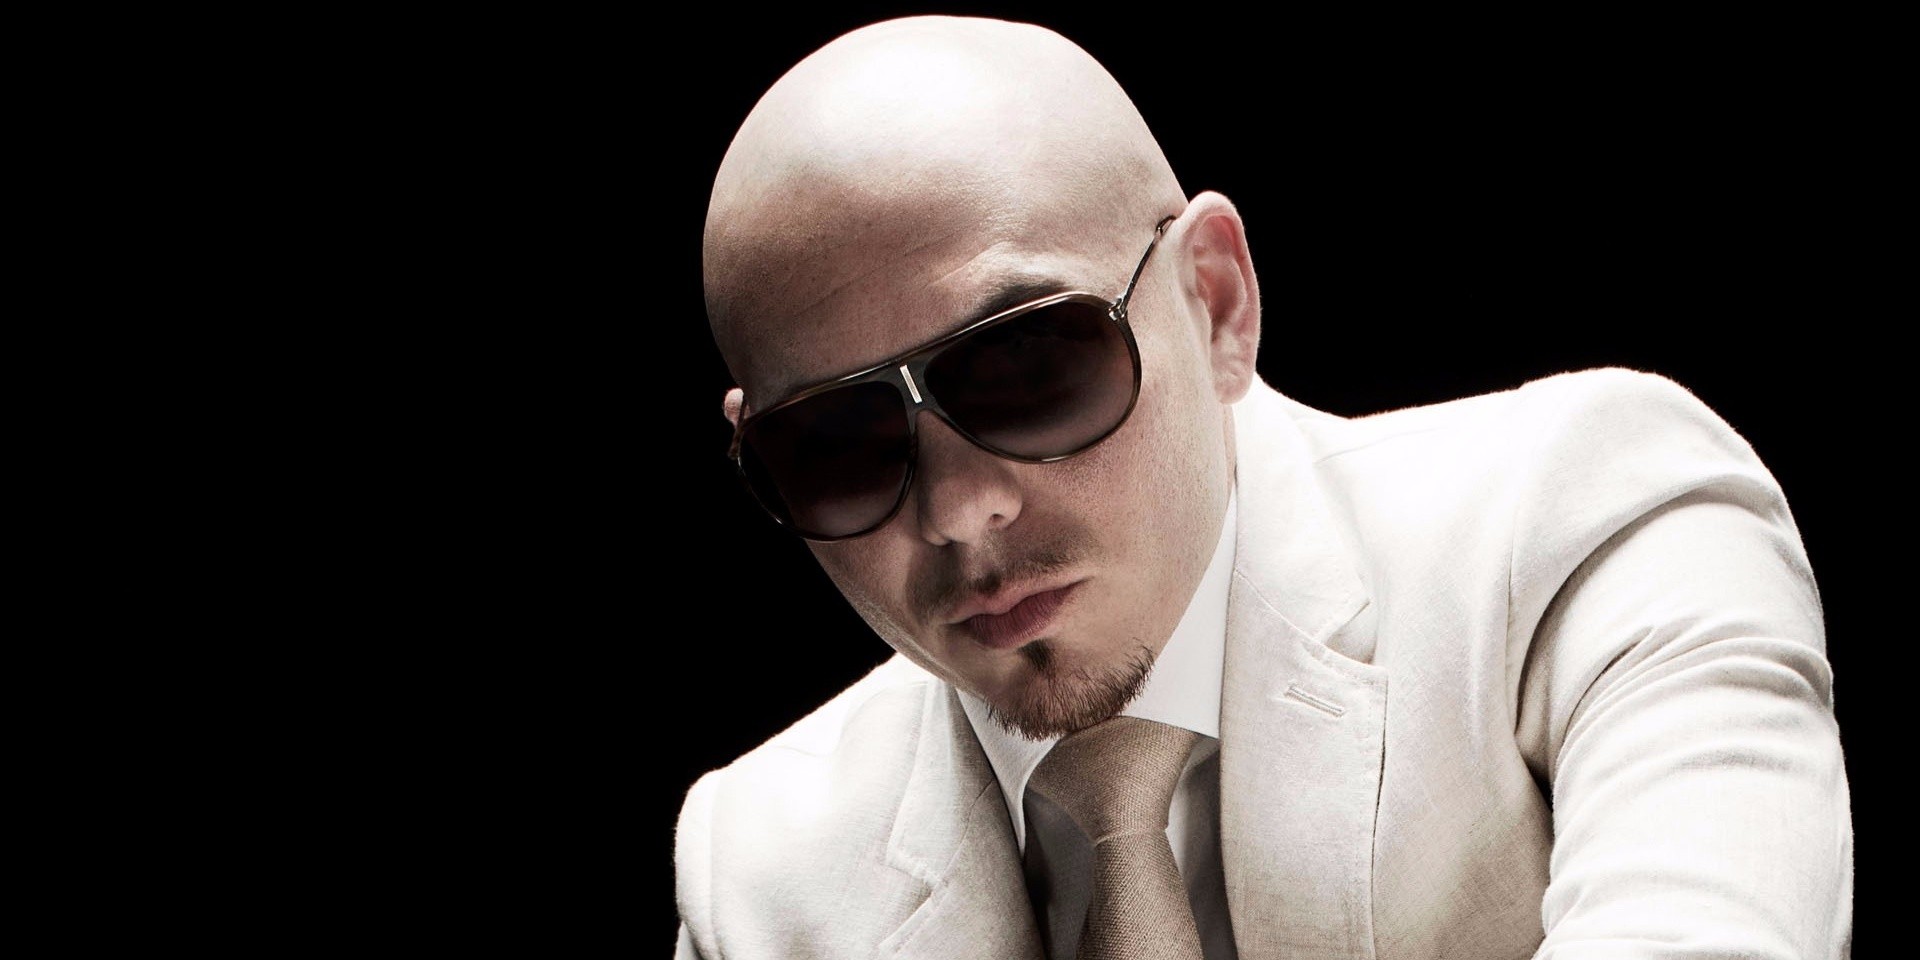 Pitbull's concert in Singapore is cancelled